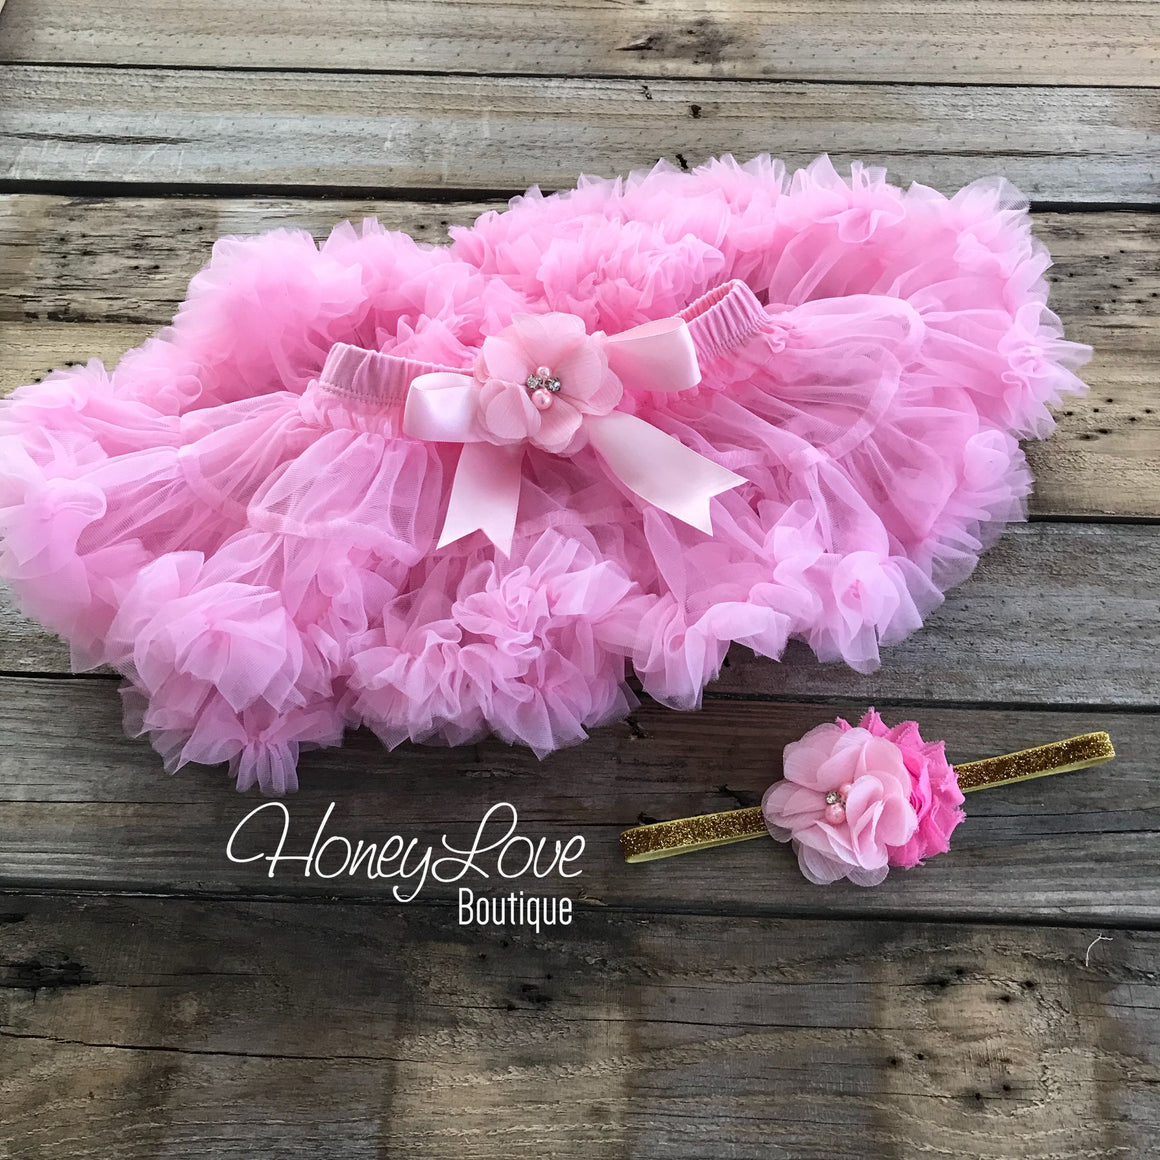 Personalized Name "is One" - 1st Birthday Outfit - Light Pink and Silver/Gold Glitter - embellished pettiskirt - HoneyLoveBoutique